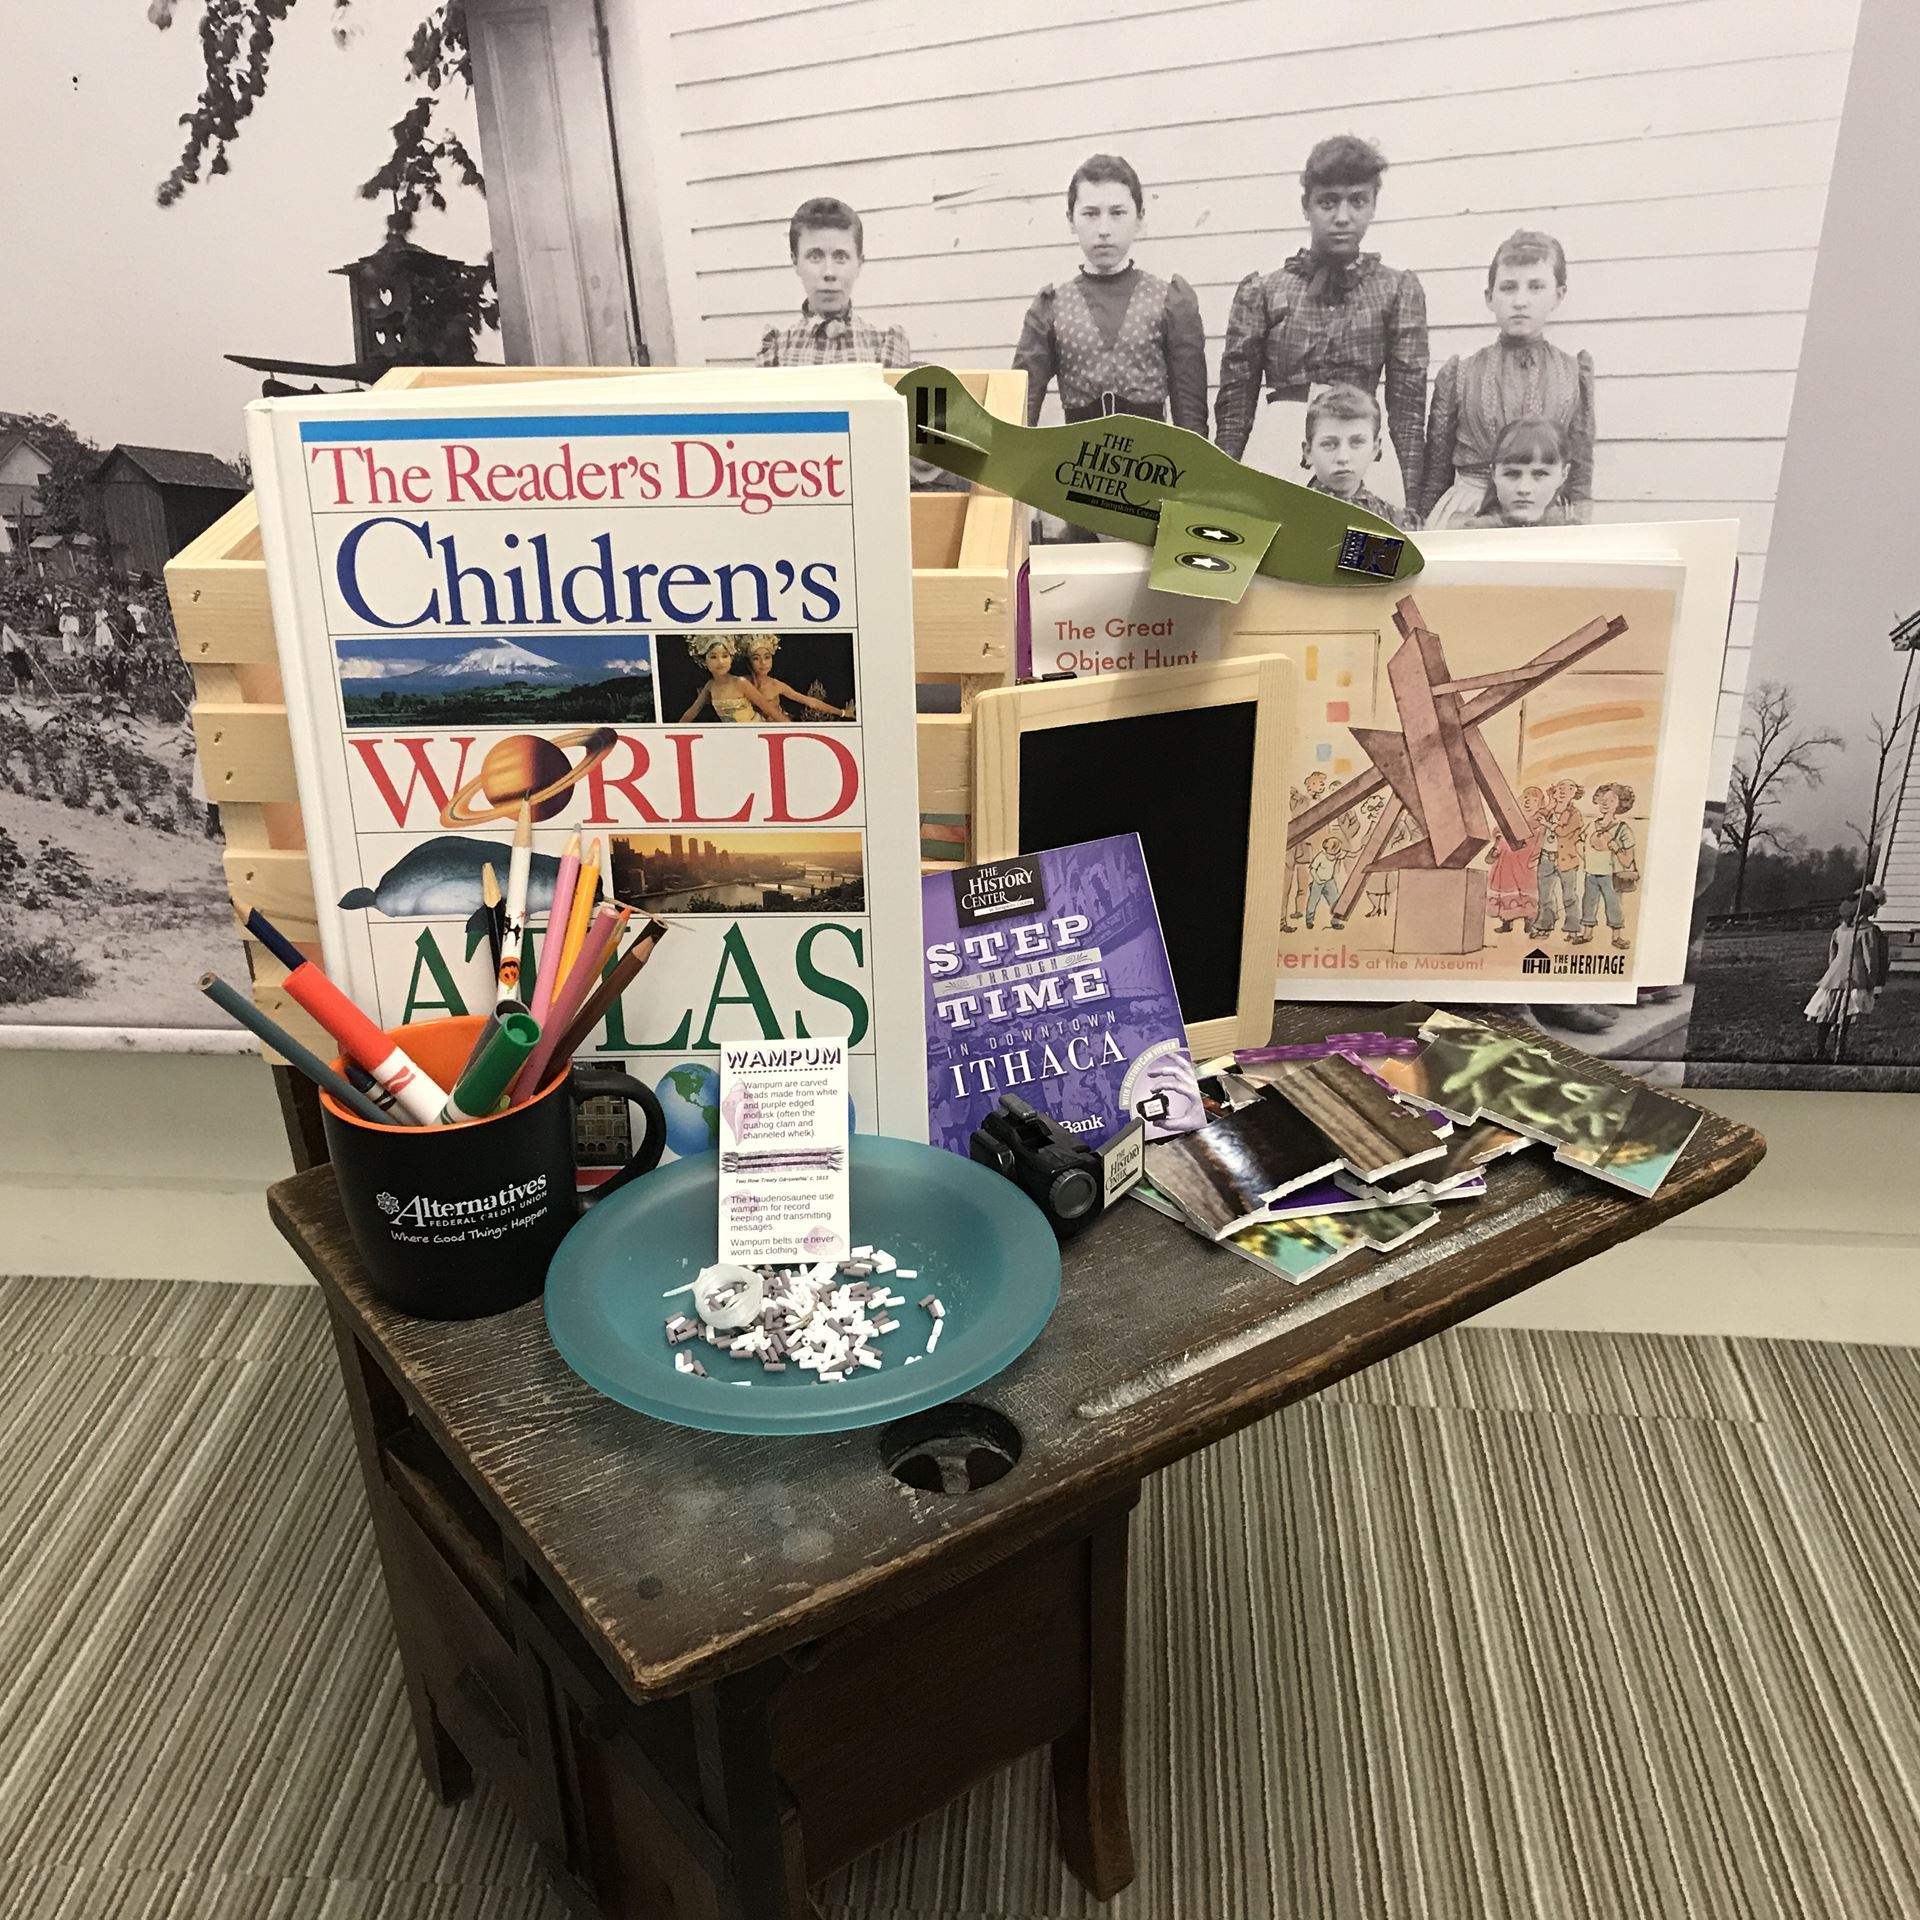 A photo of a museum activity crate, surrounded by a large children's atlas, a cup full of writing utensils. and other various activities.